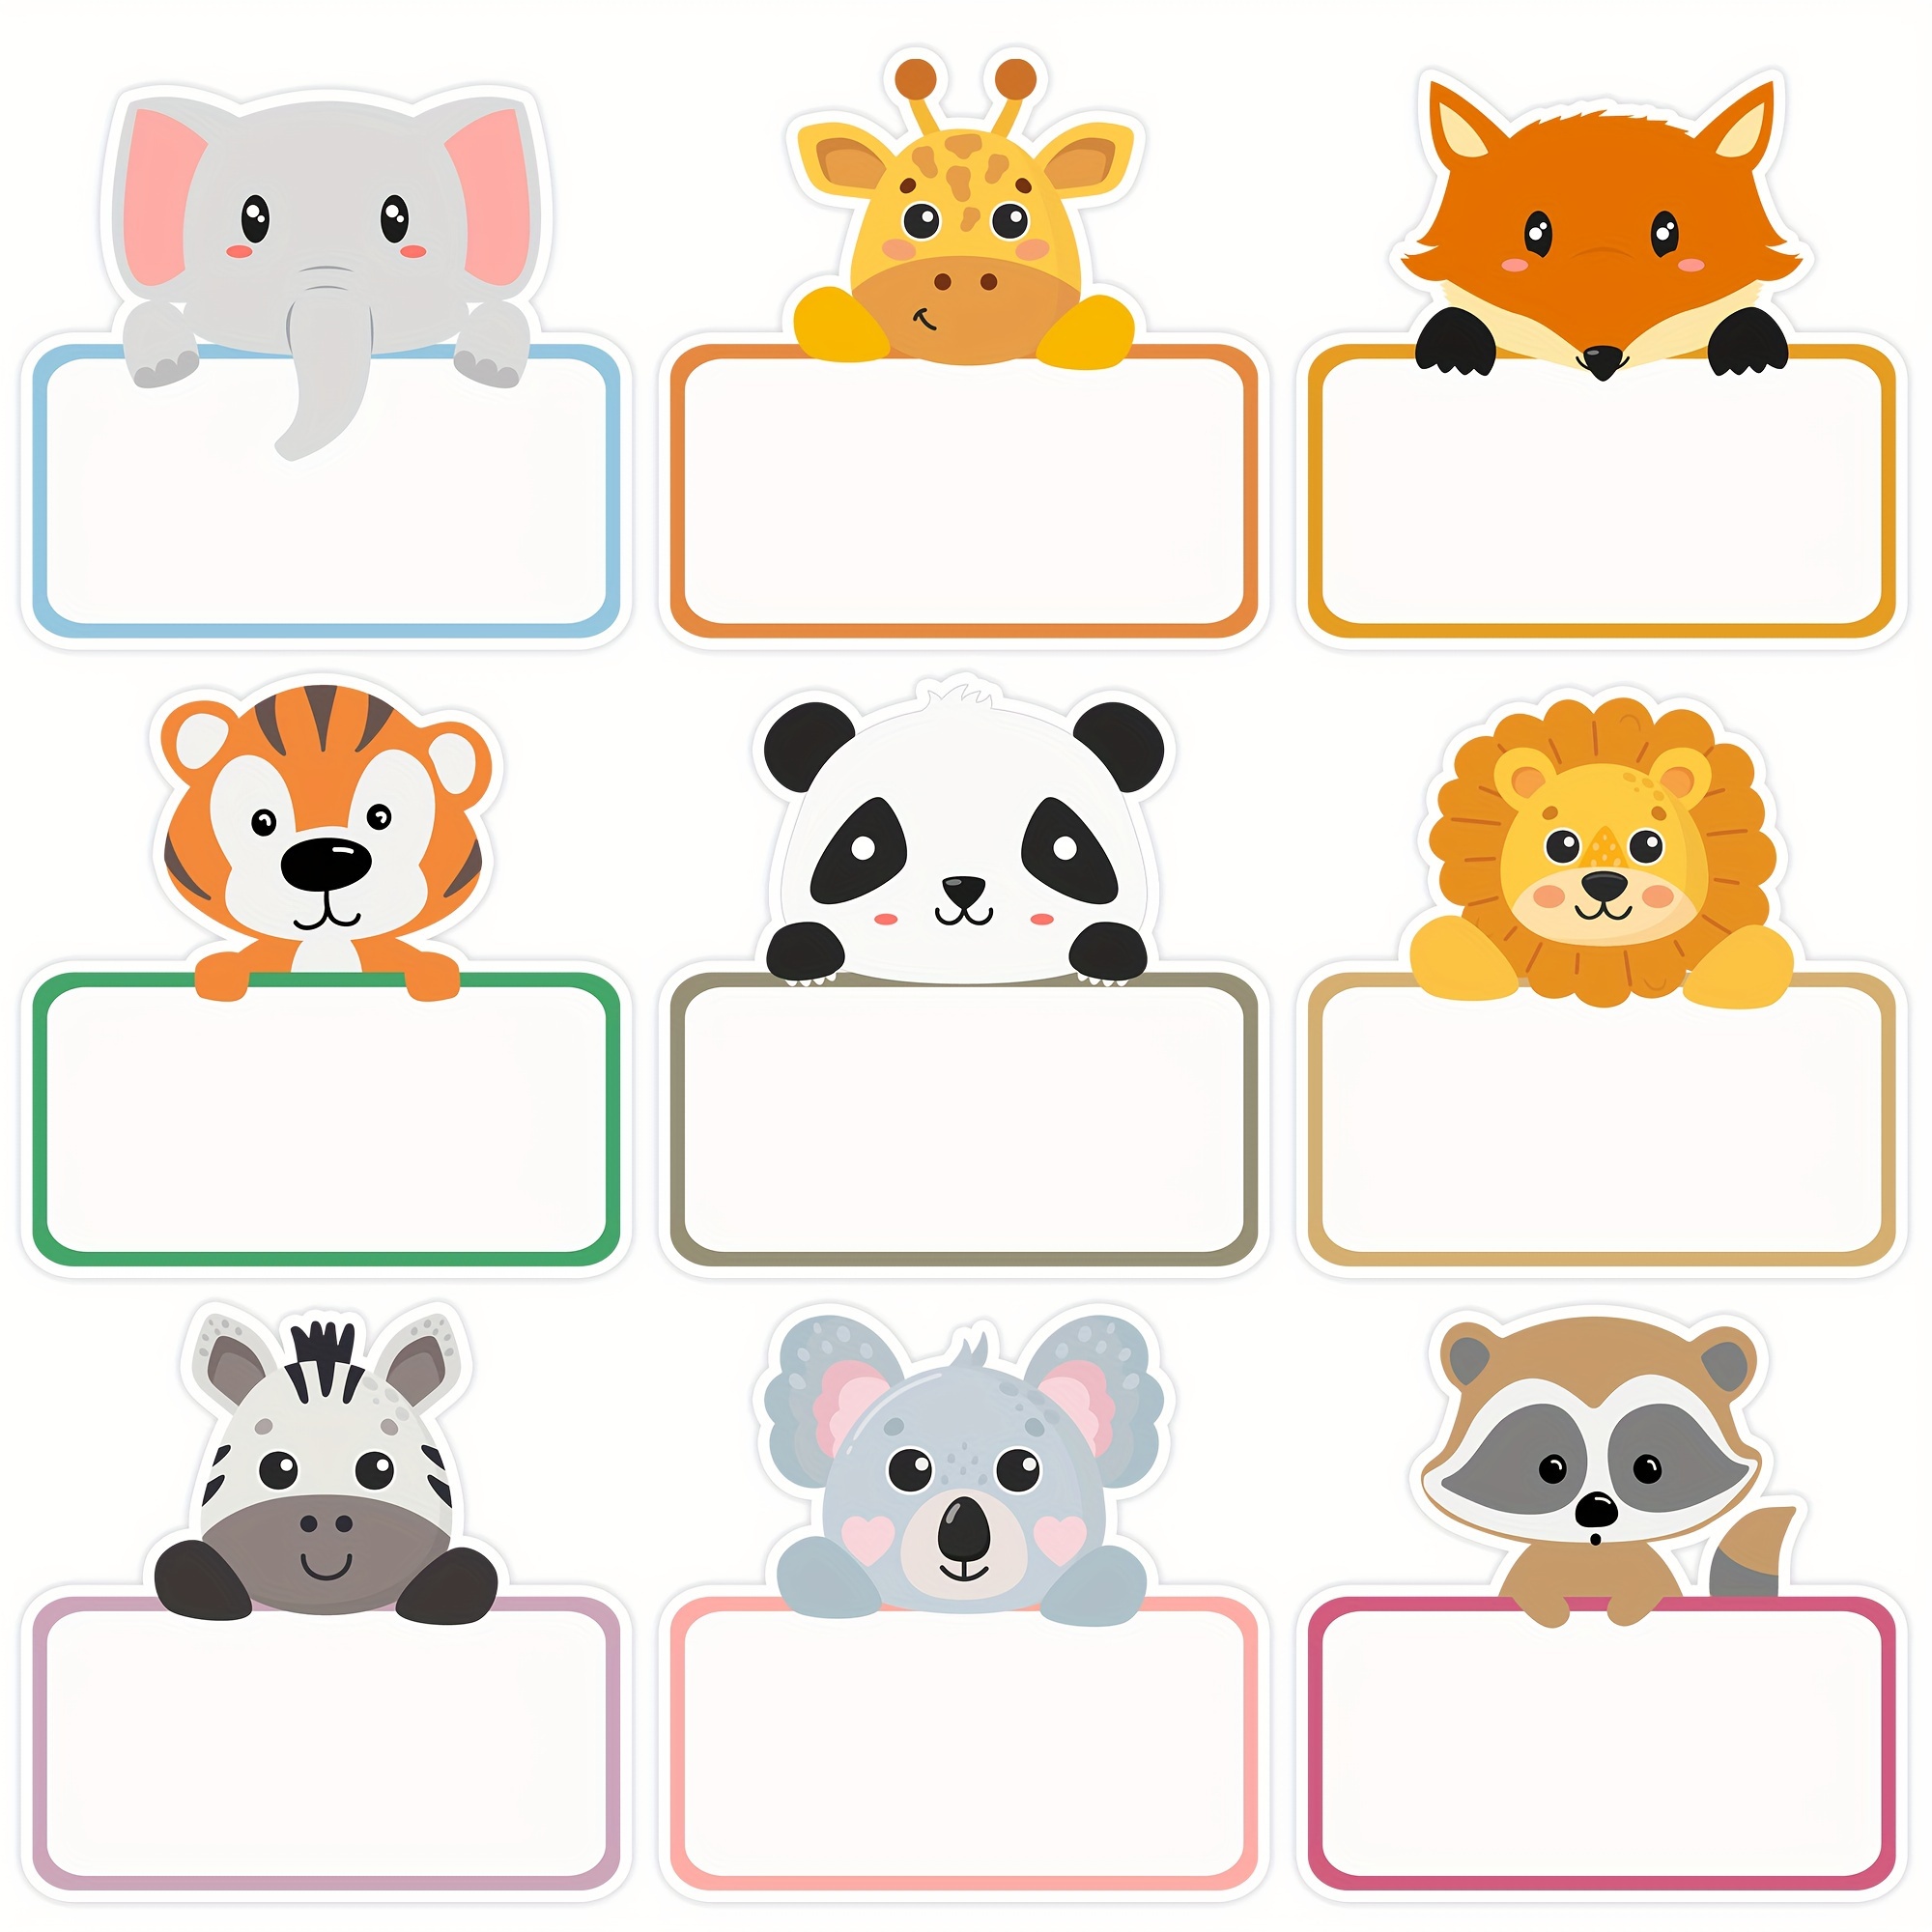 

135-piece Jungle Animal Name Tags - Self-adhesive Labels For Classroom, Office Desk Organization & Gift Pieceaging